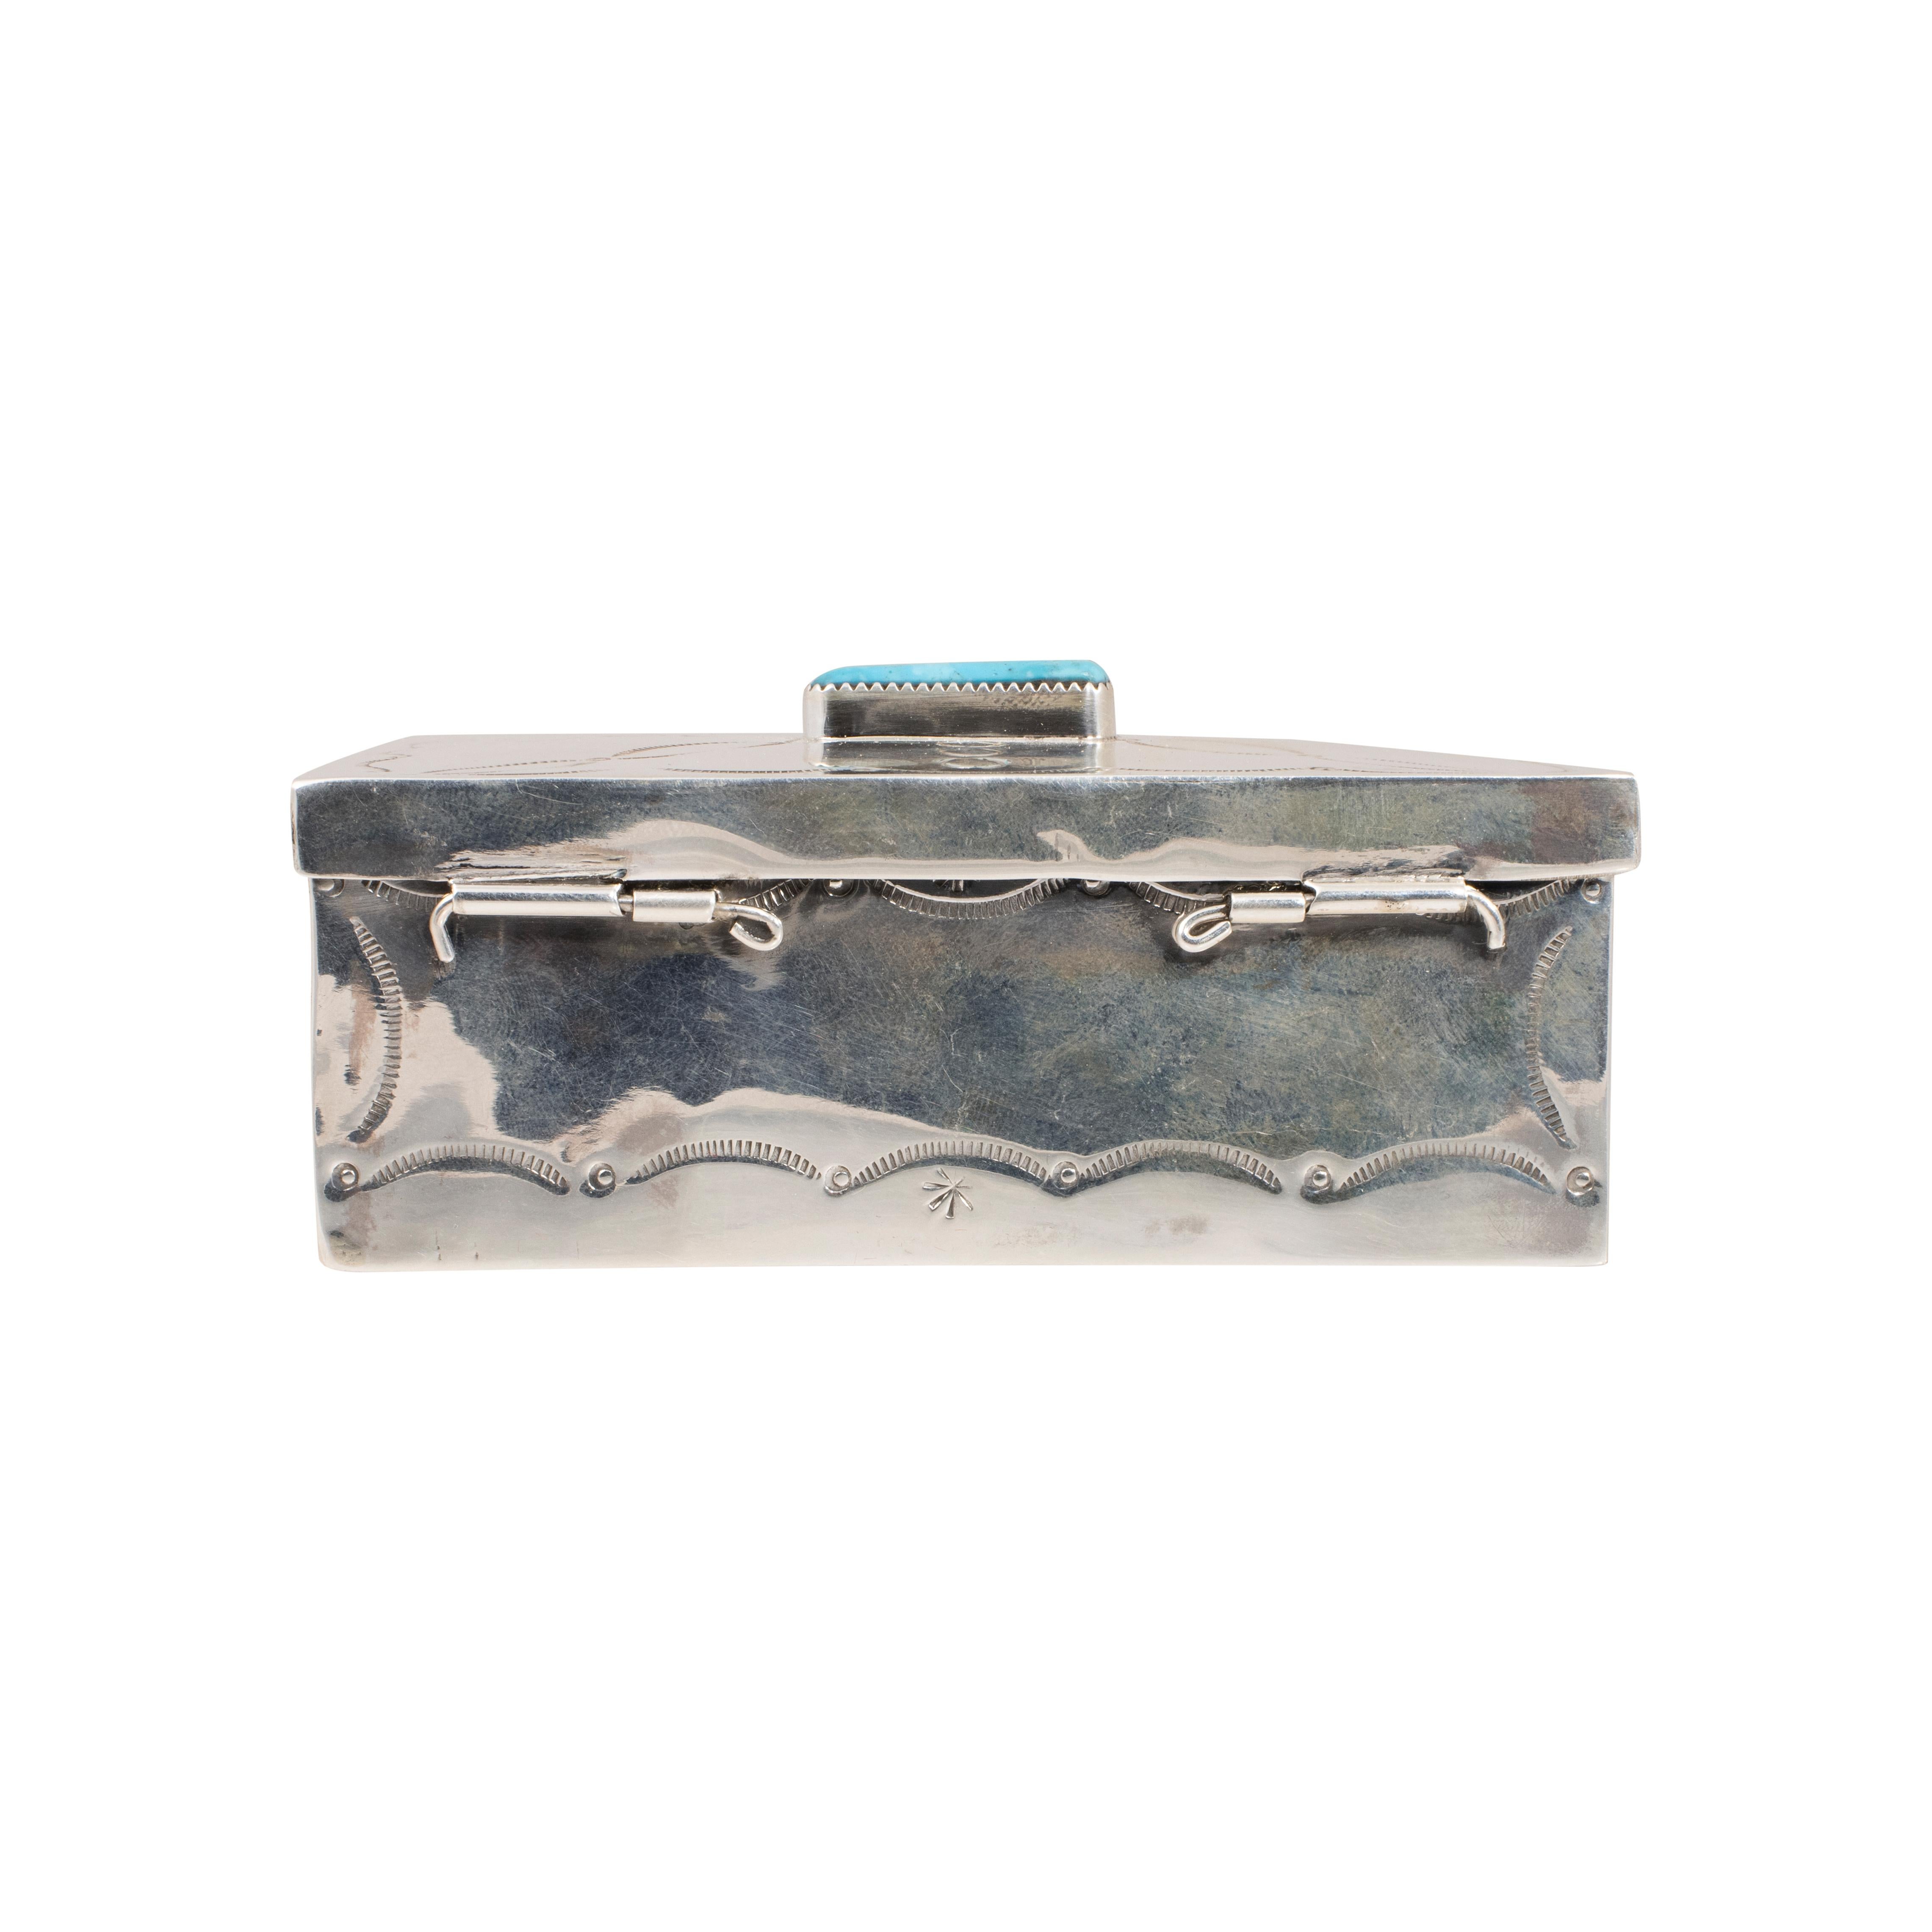 Navajo  sterling silver and Fox turquoise box. This box has an amazing finish and styling that resembles the Navajo stamp work of the early 1900’s. On the top is a nice size, polished cabochon of Stormy Mountain turquoise, showing a blue-green